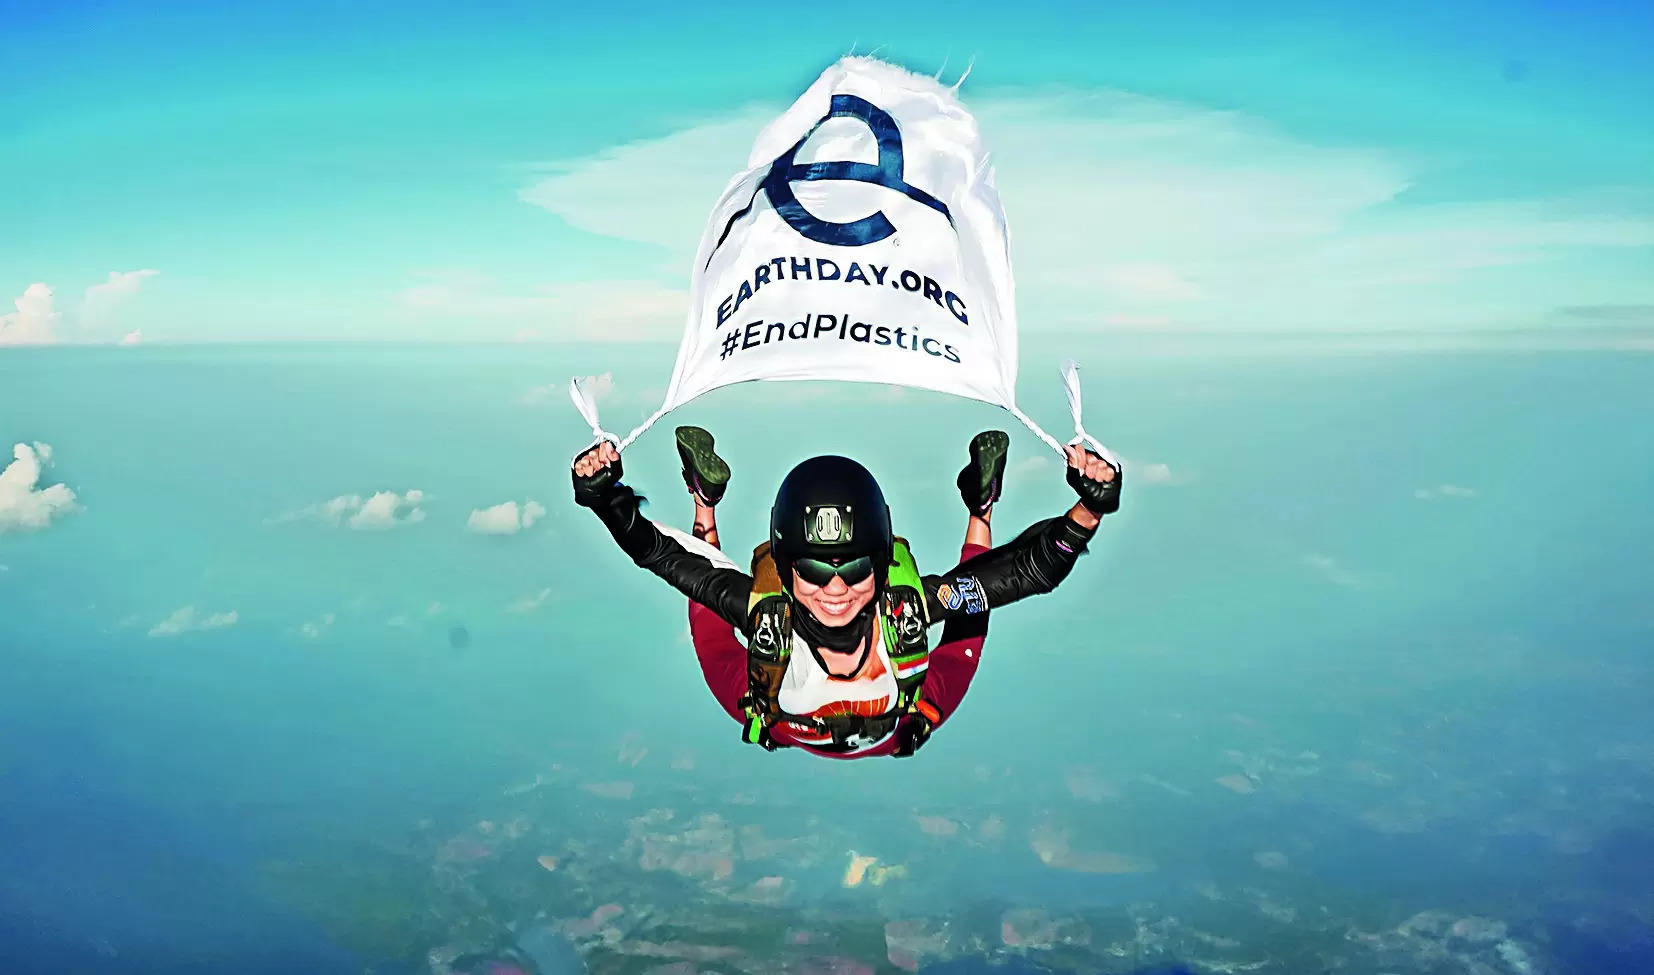 This skydiver sends ‘No Plastic’ message from 13,000 feet